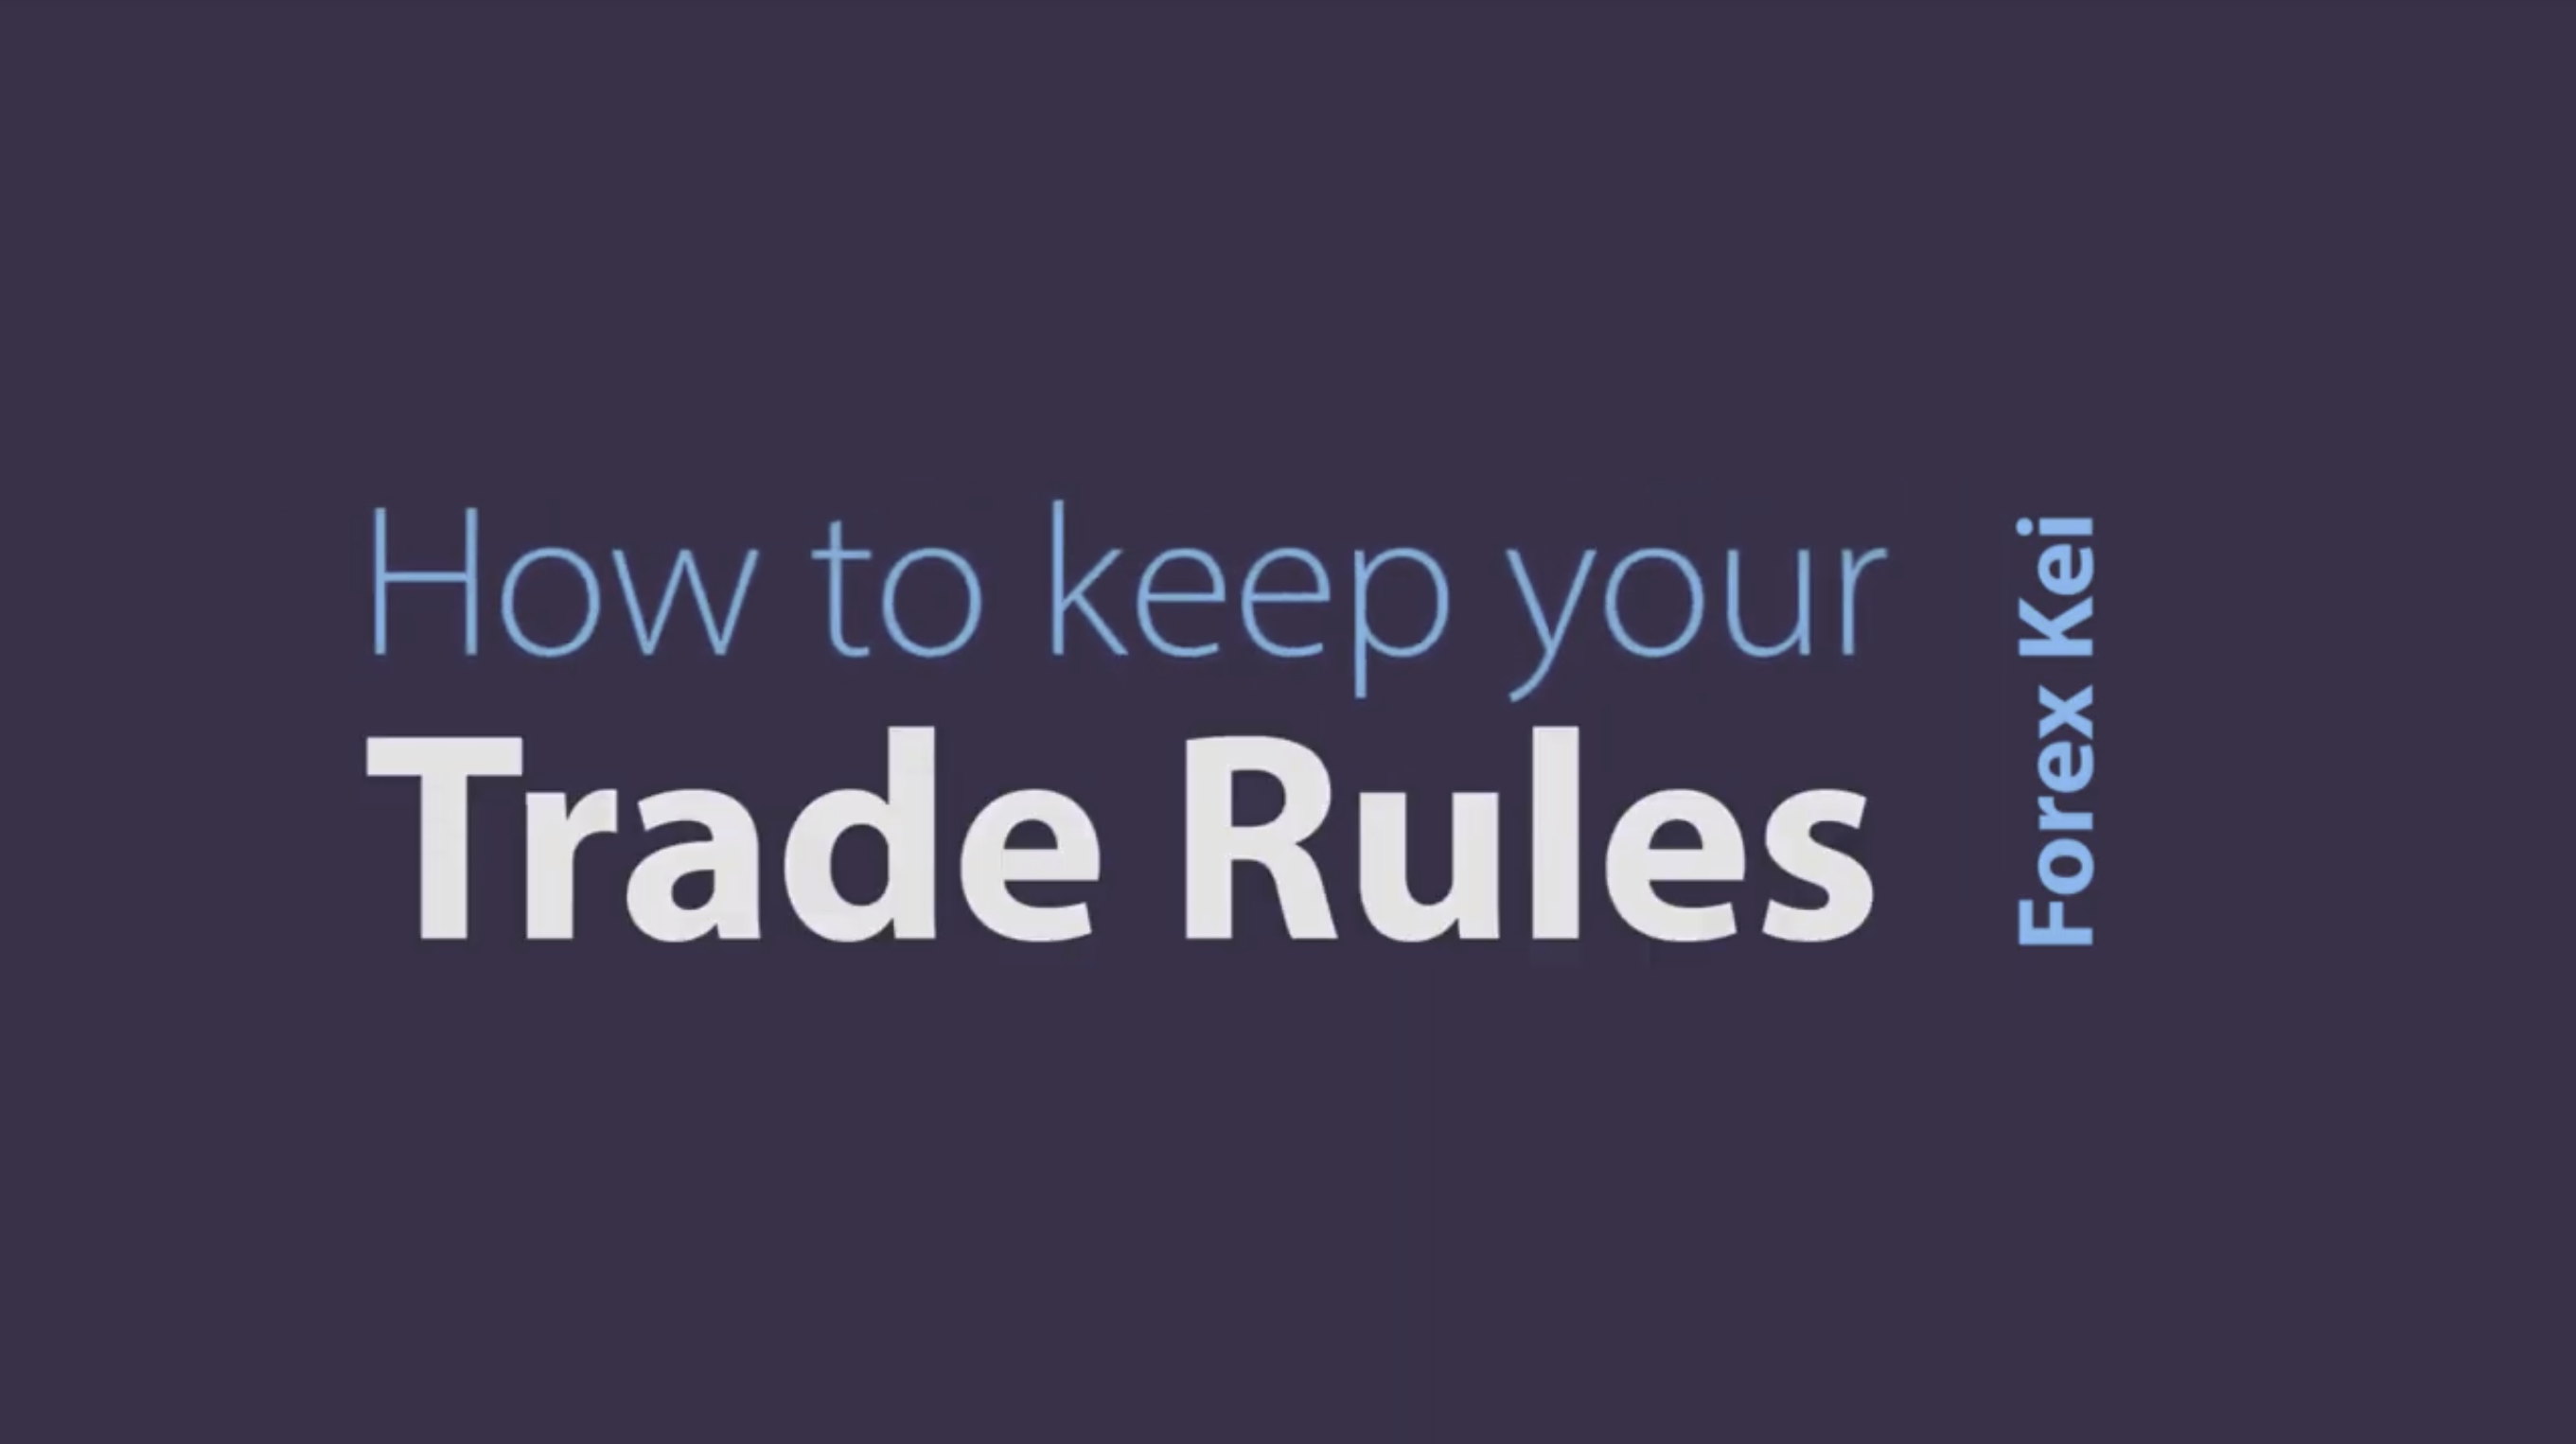 How to keep your trade rules based on psychology